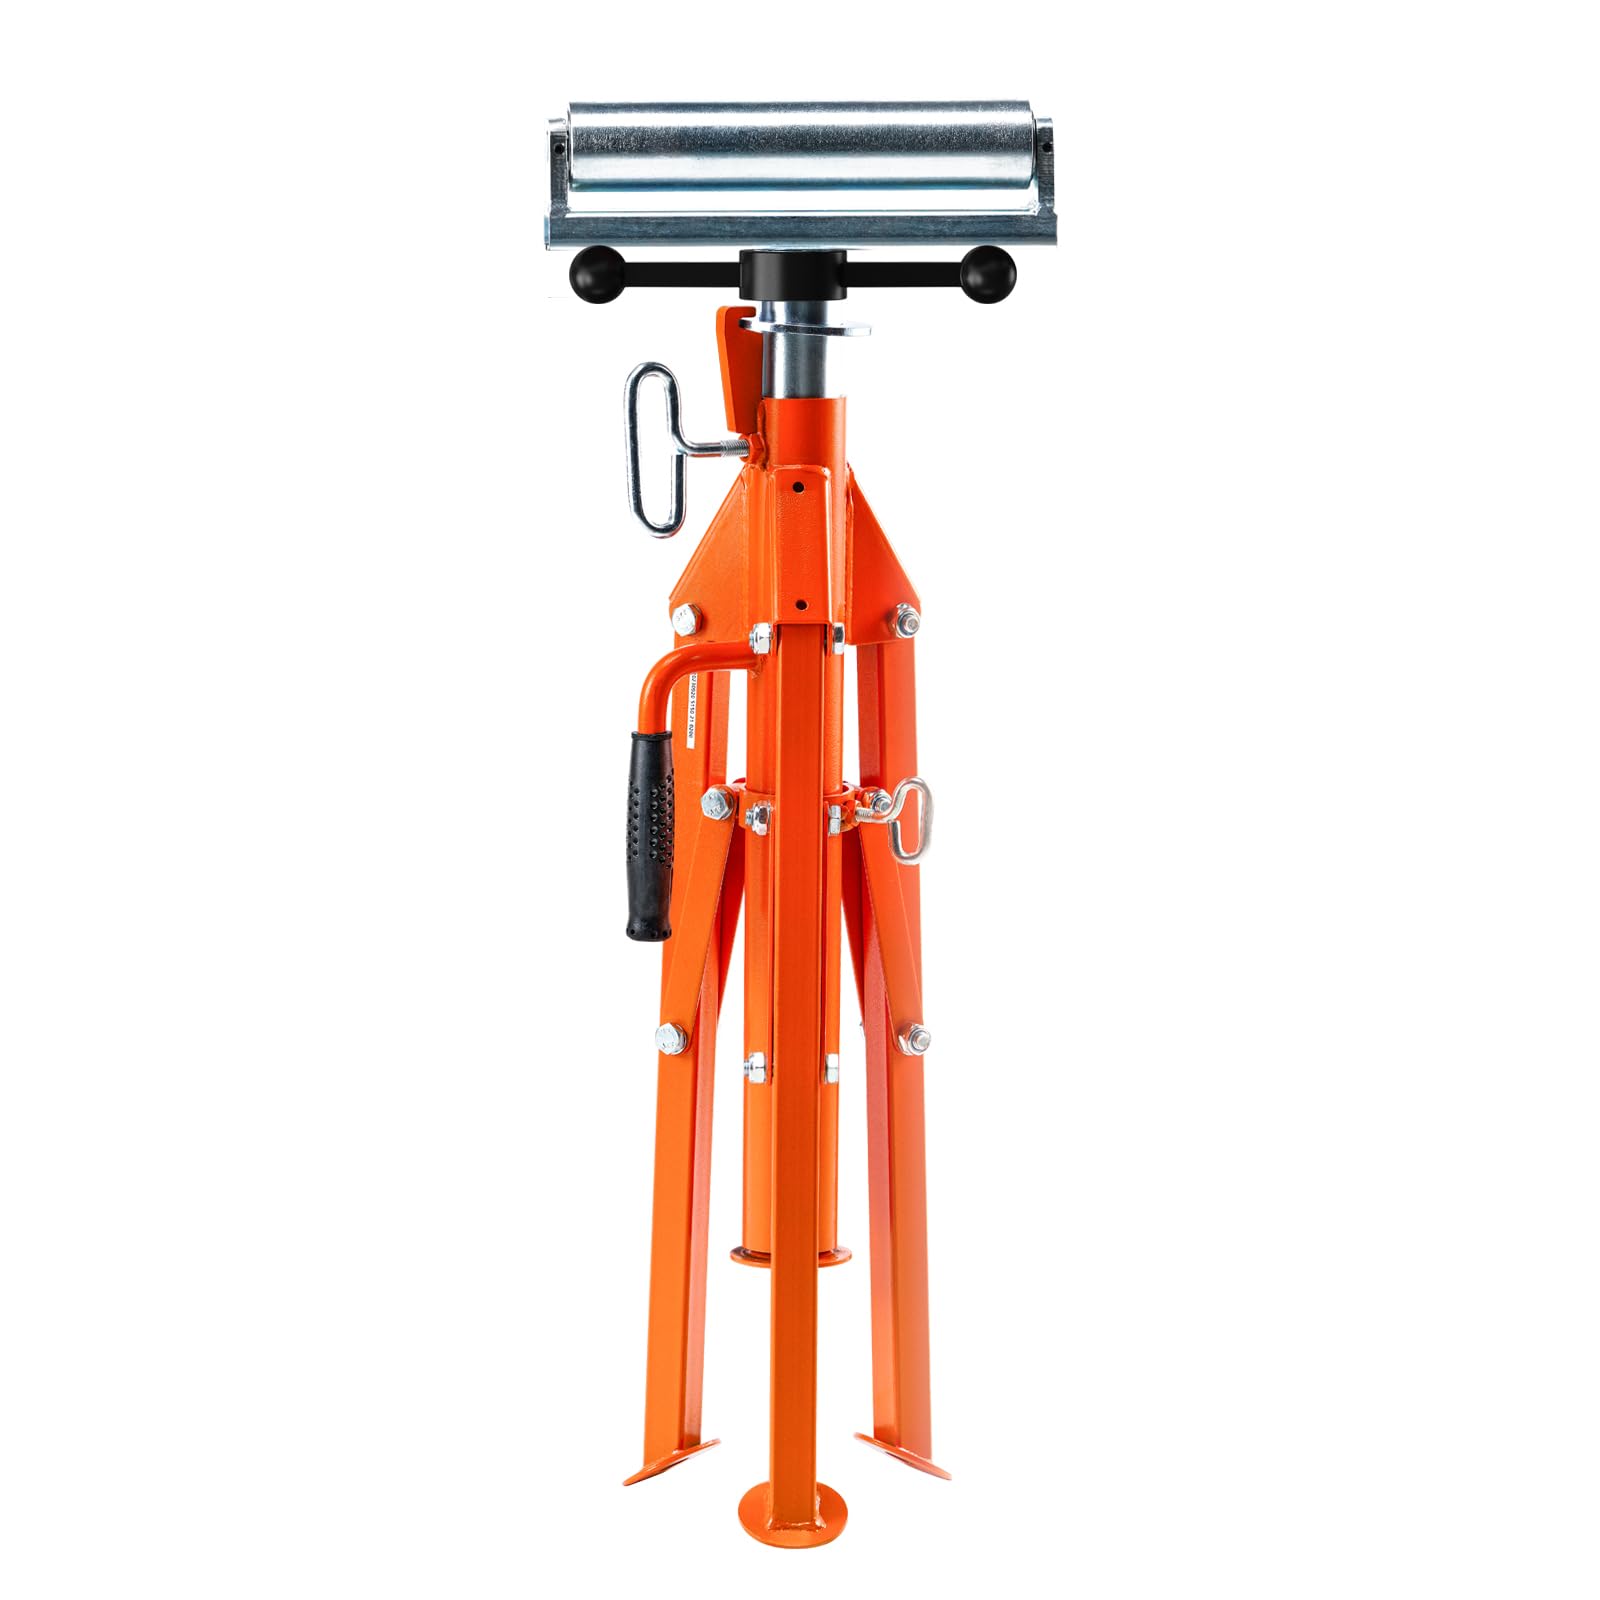 VEVOR Roller Stand, Heavy Duty 2500 LBS Load Capacity Tool Stand - 28